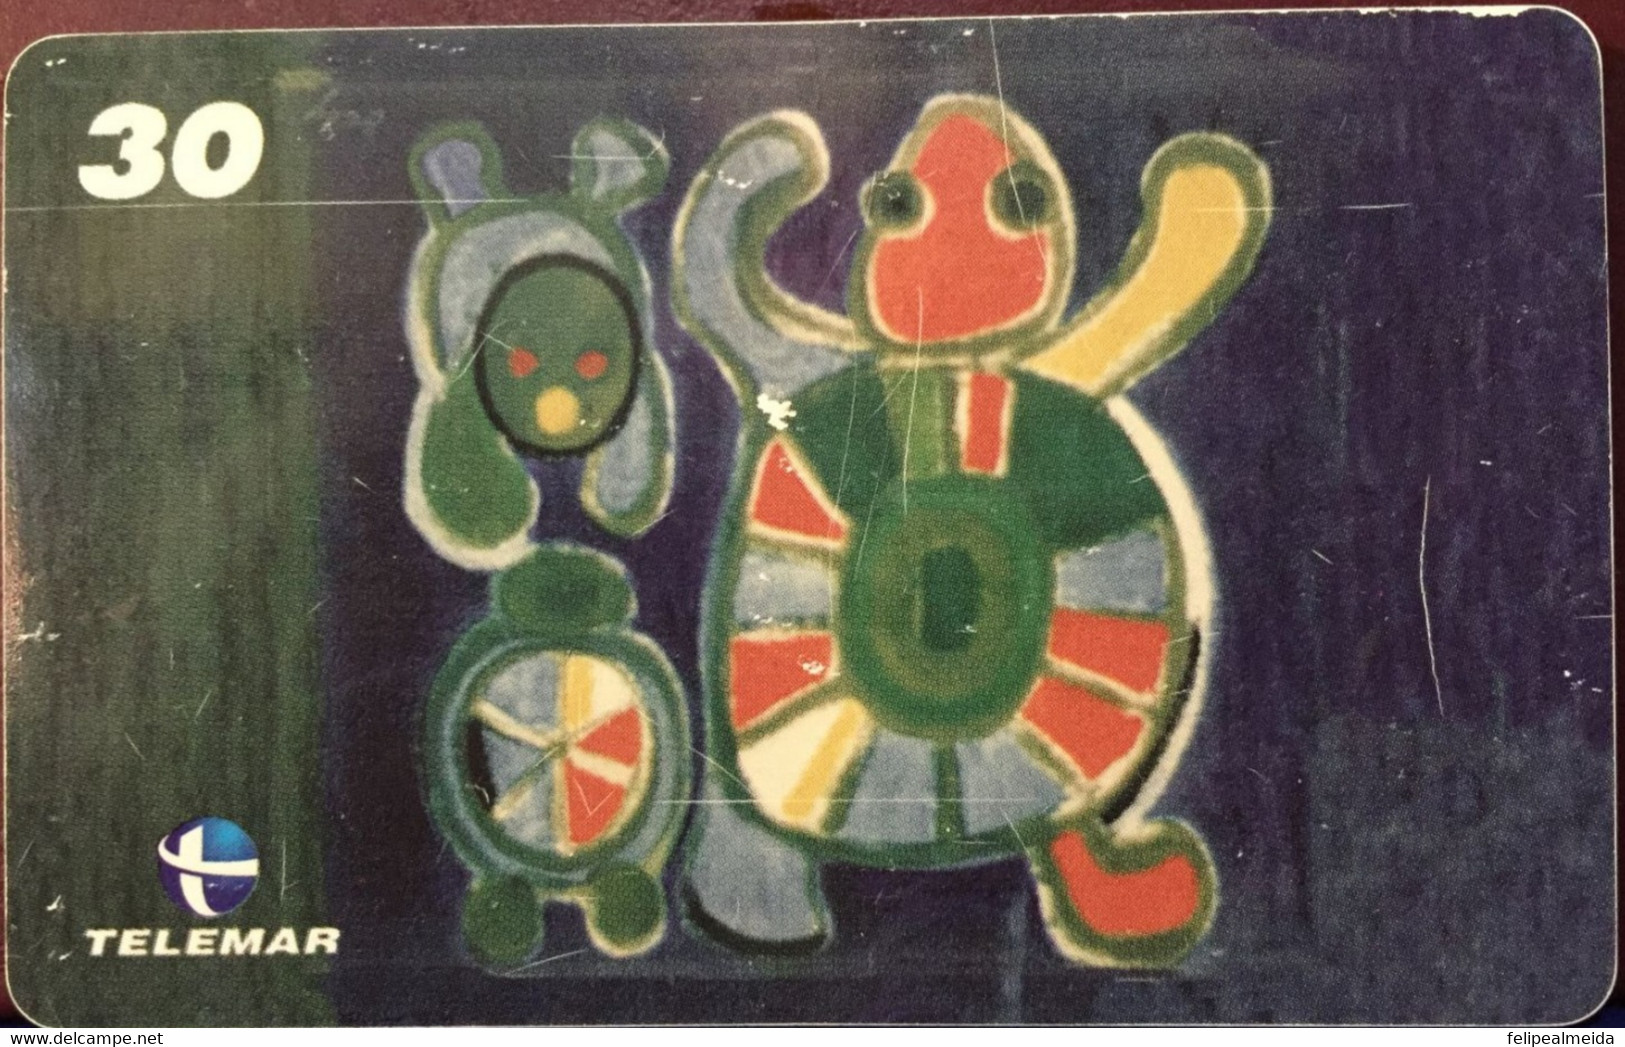 Phone Card Manufactured By Telemar In 2000 - Series A Moment In Brazilian Art - Artist Olly Reinheimer - Pittura